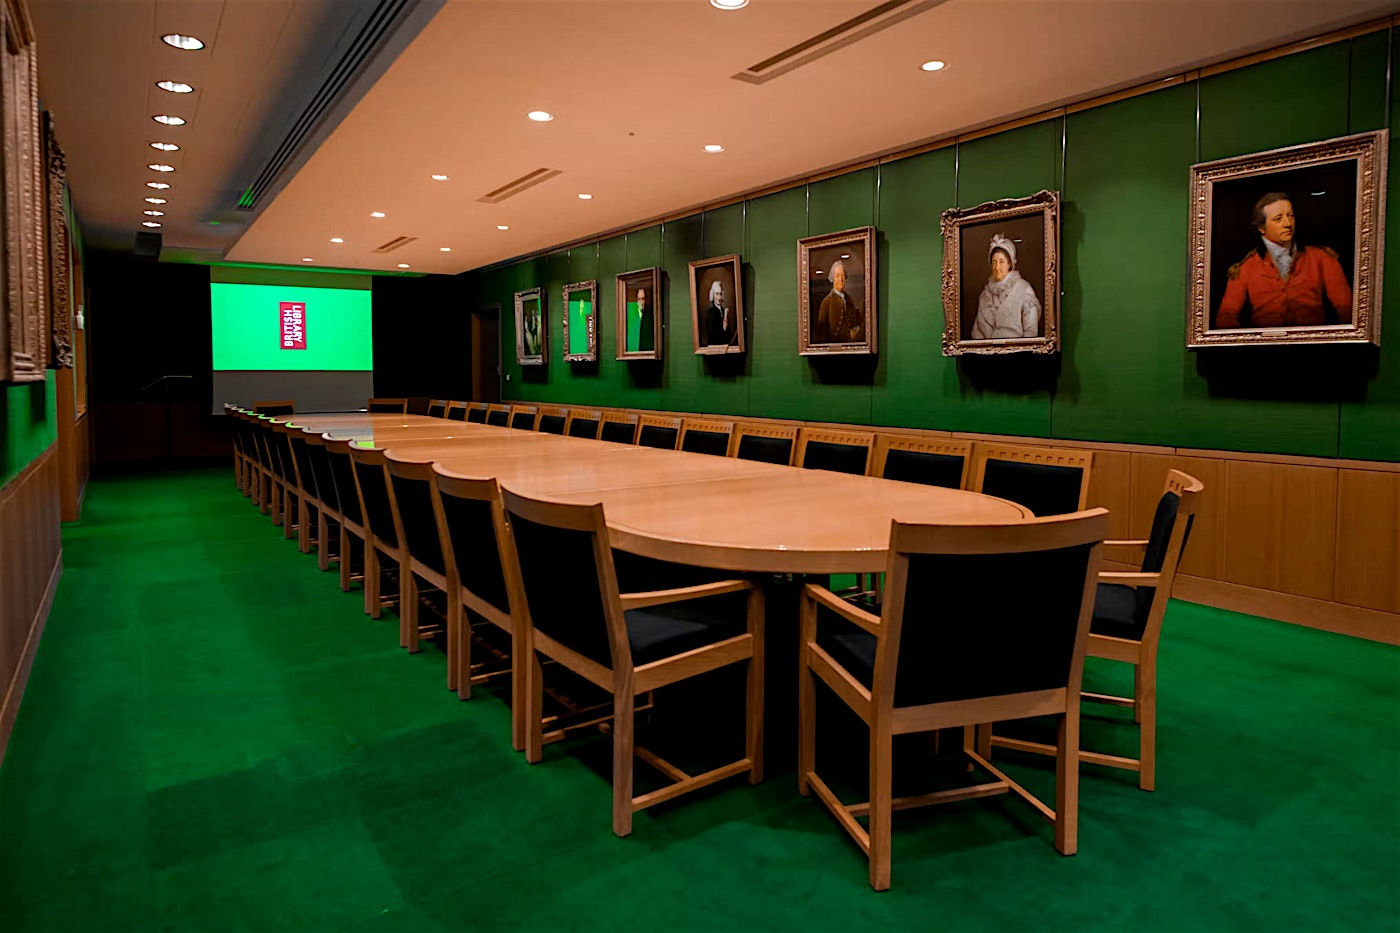 A boardroom style meeting room in the British Library